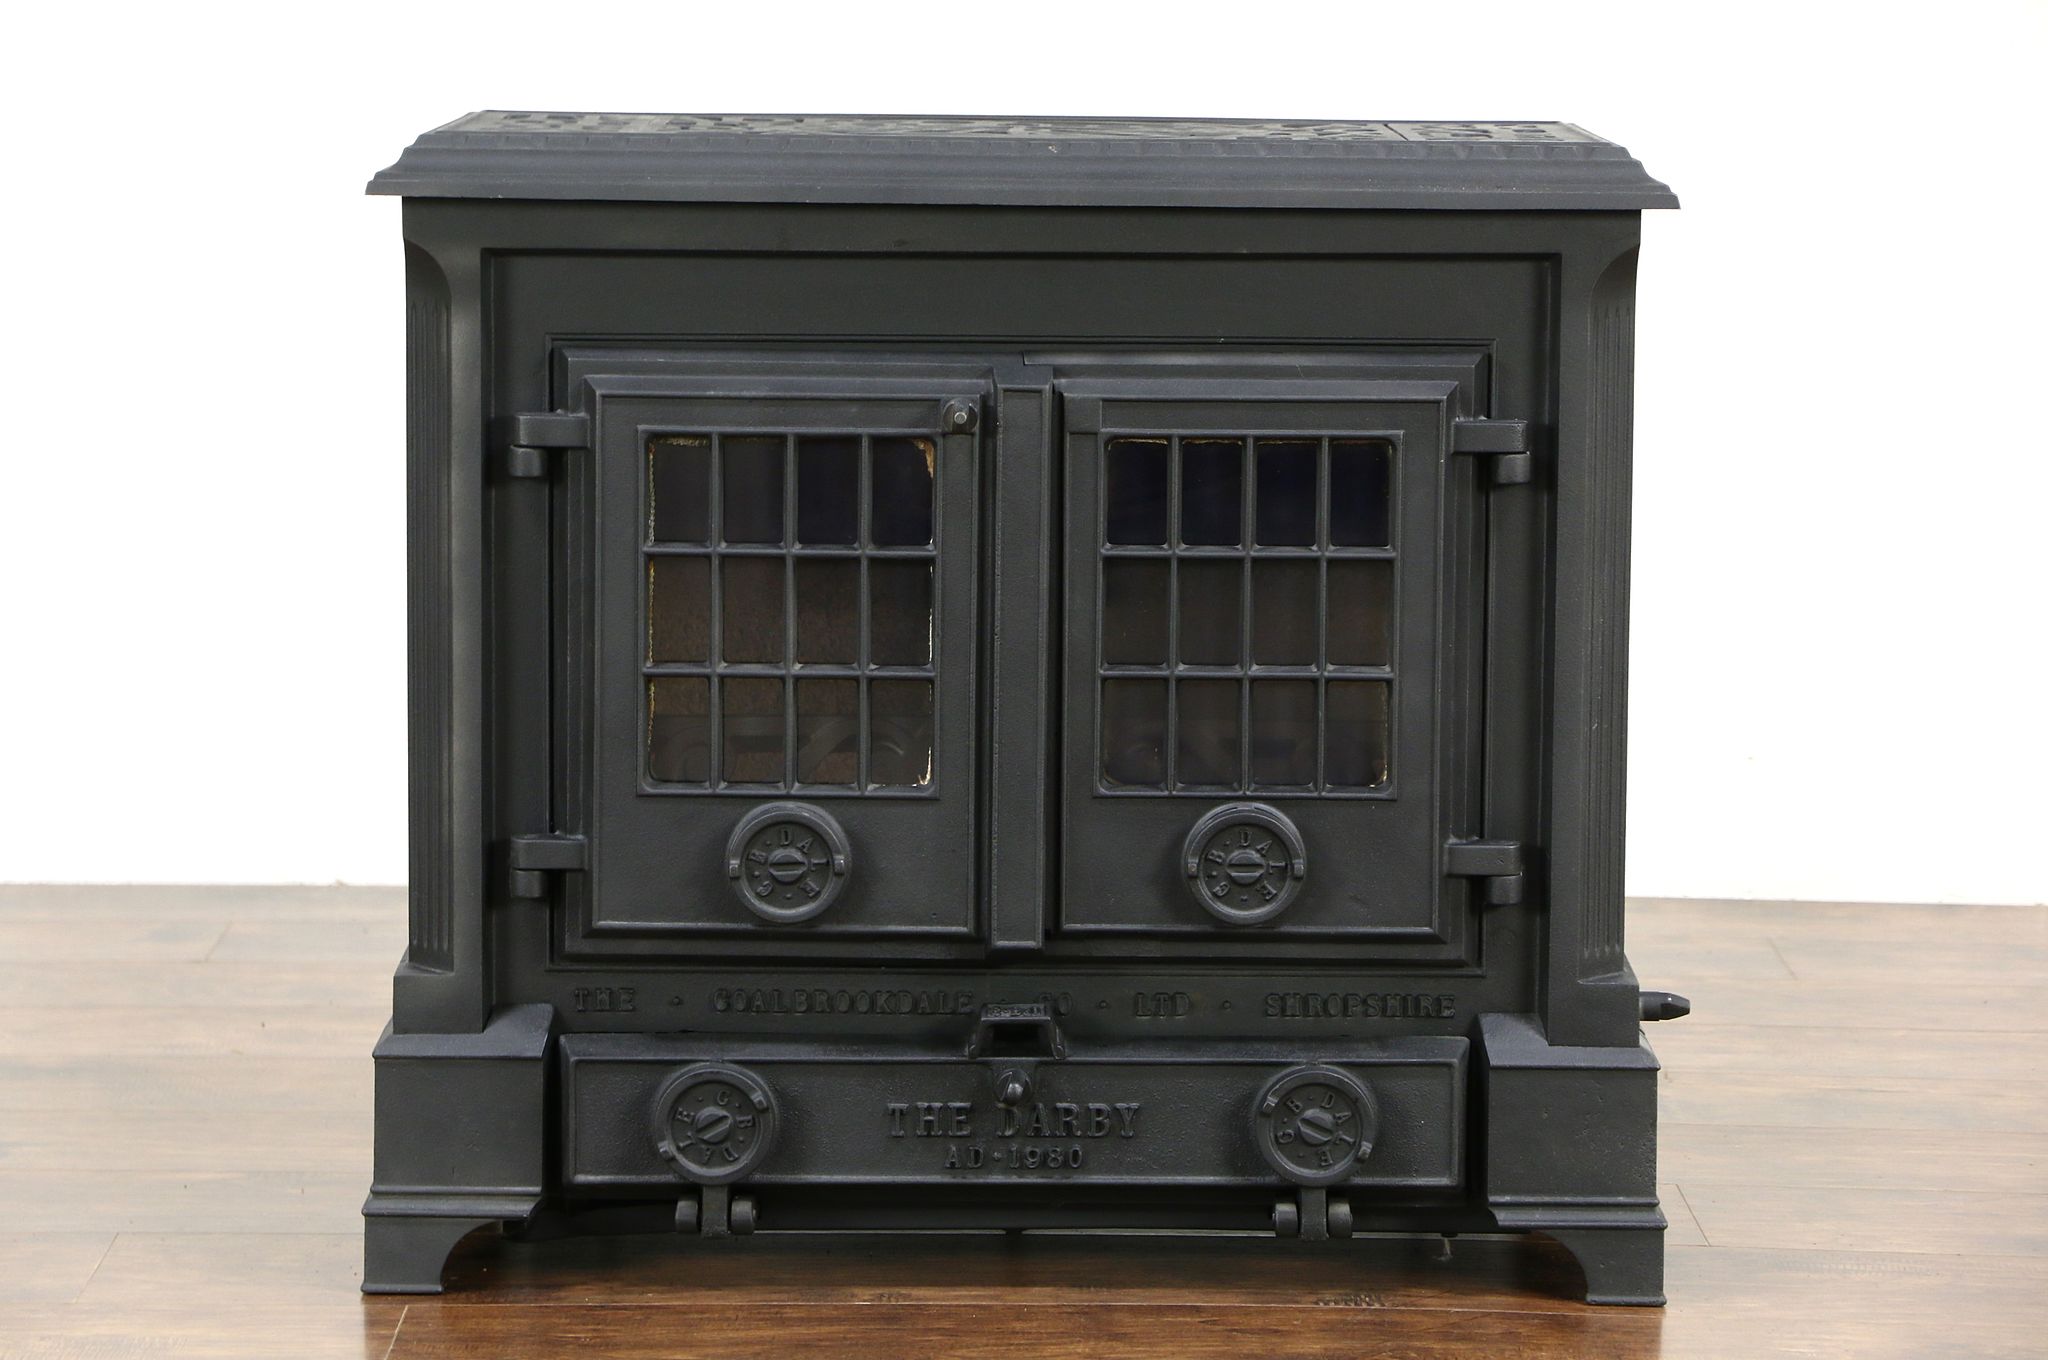 Sold Coalbrookdale Signed Darby 1980 English Iron Wood Stove